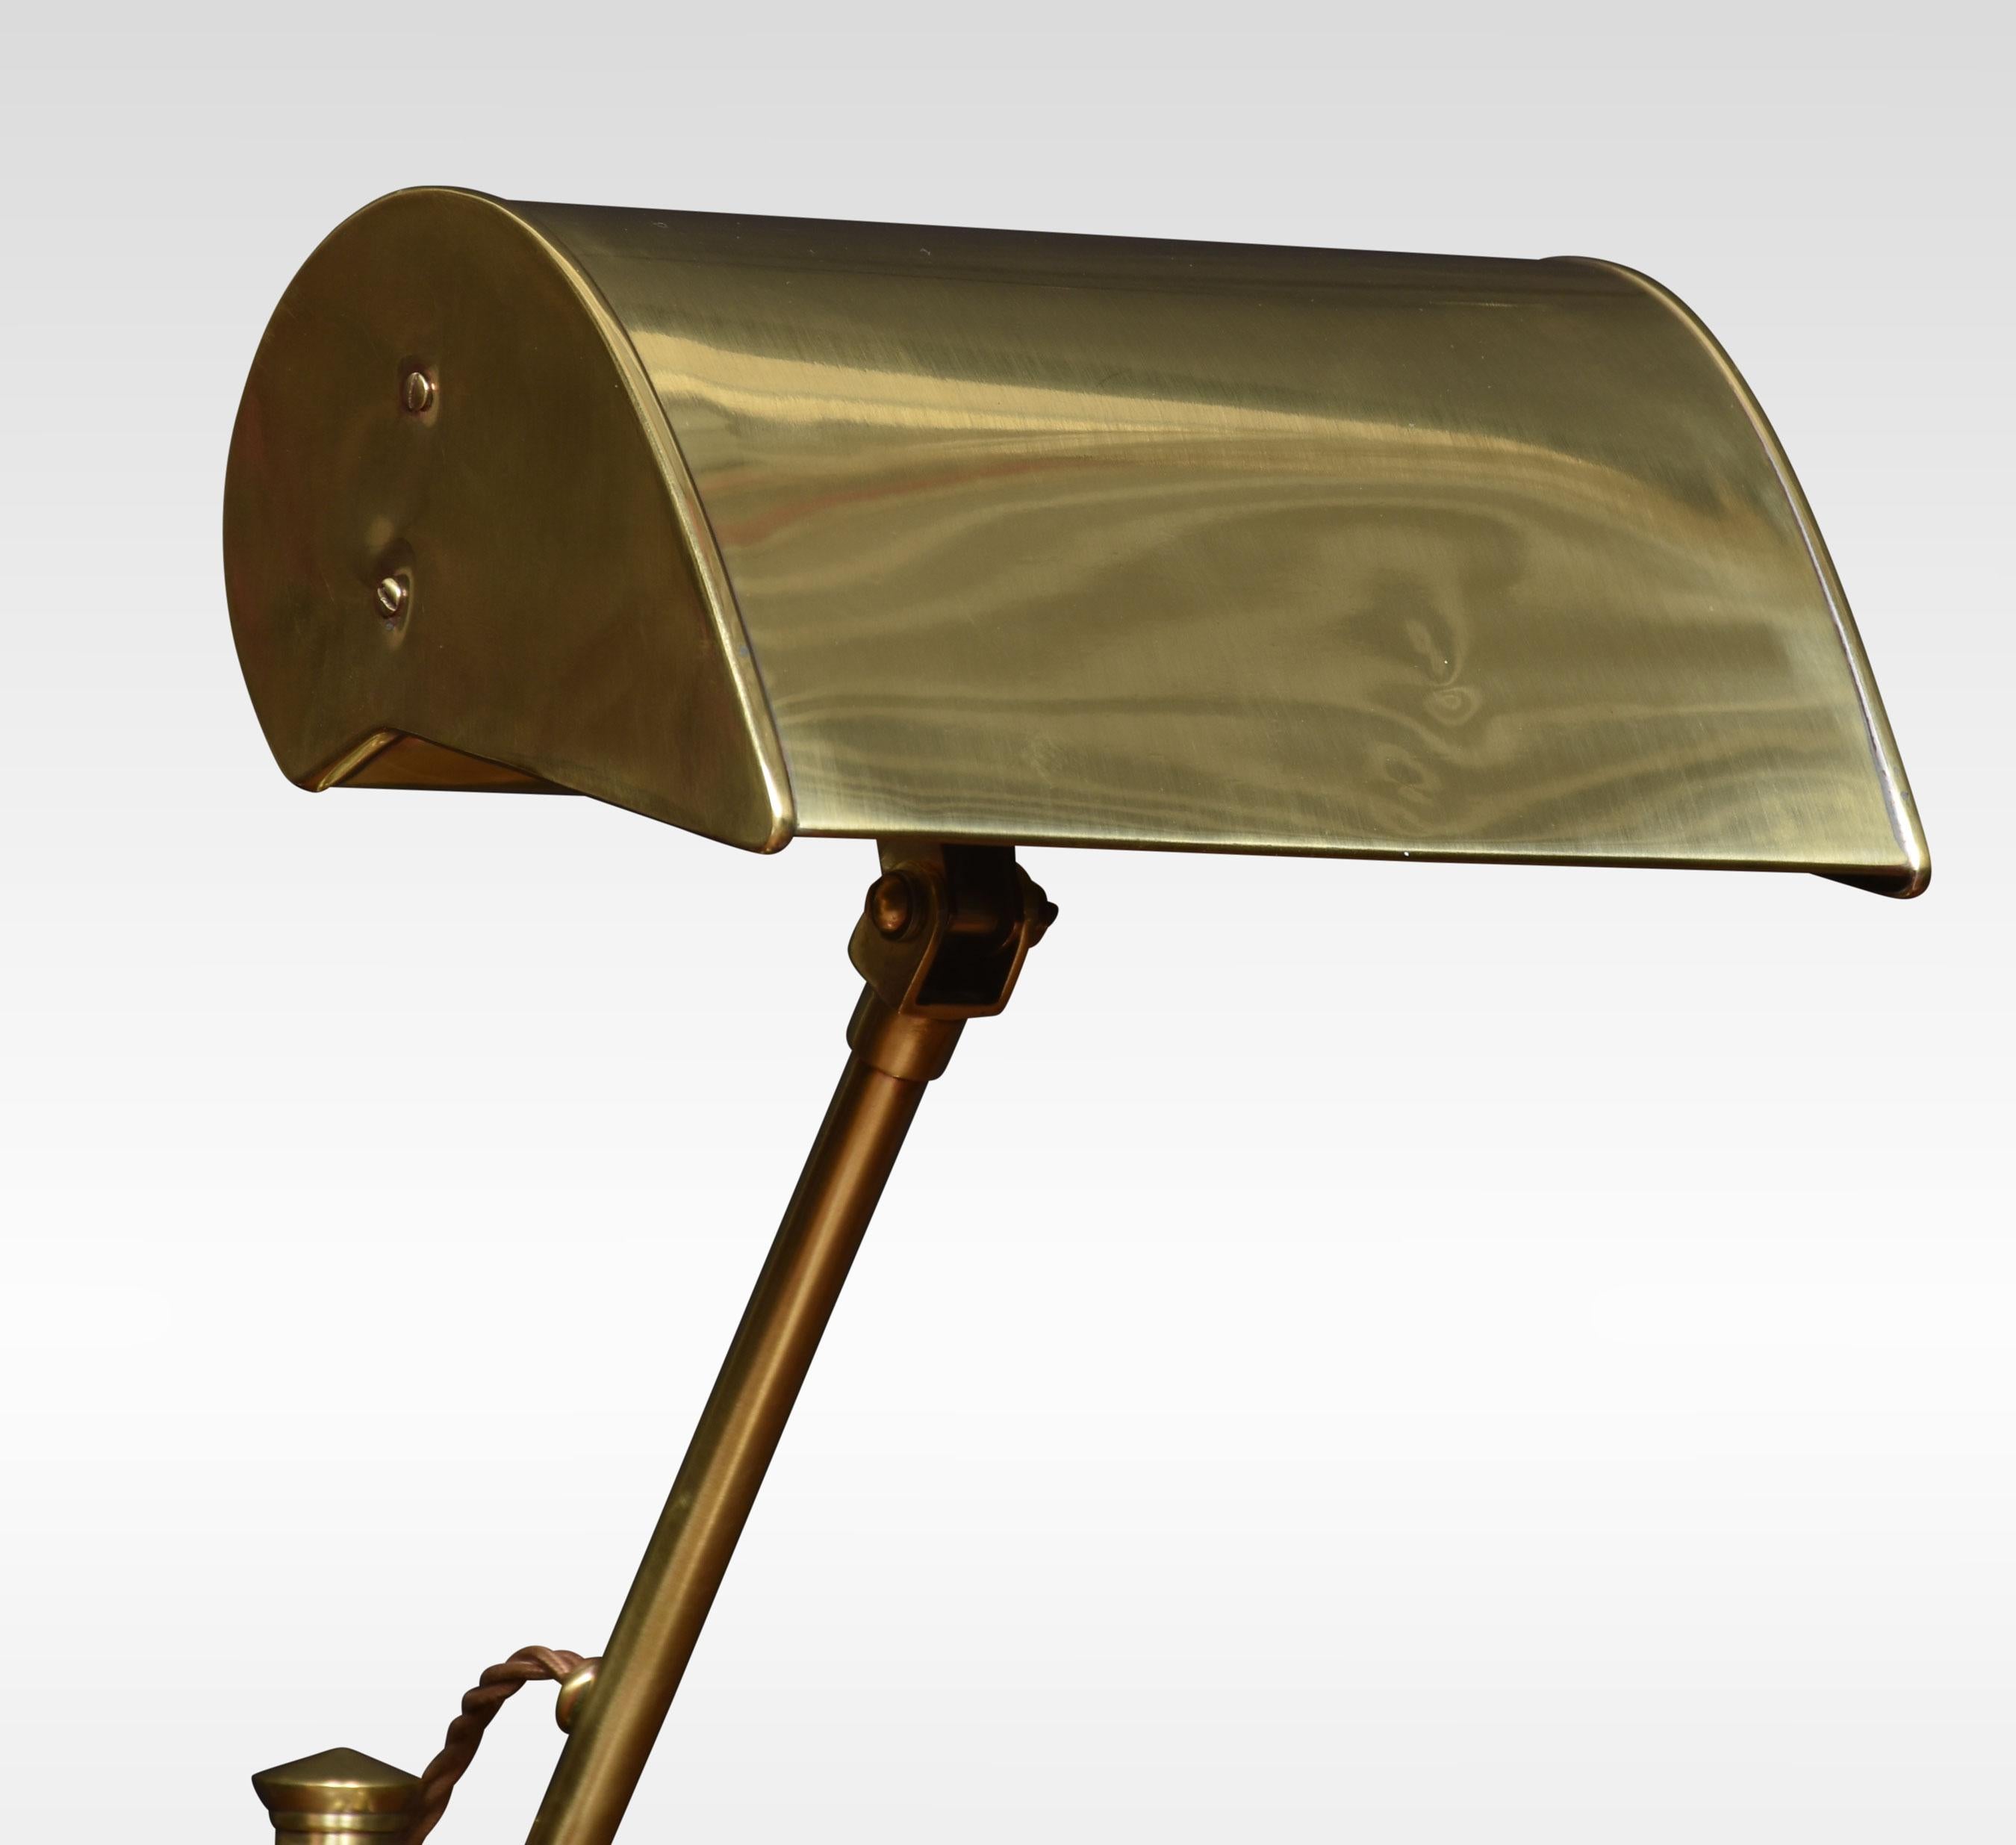 Bankers brass desk lamp, the shaped brass base, and pivoted sweeping arm supporting adjustable lampshade. The lamp has been rewired.
Dimensions
Height 18 Inches
Width 8.5 Inches
Depth 8 Inches.